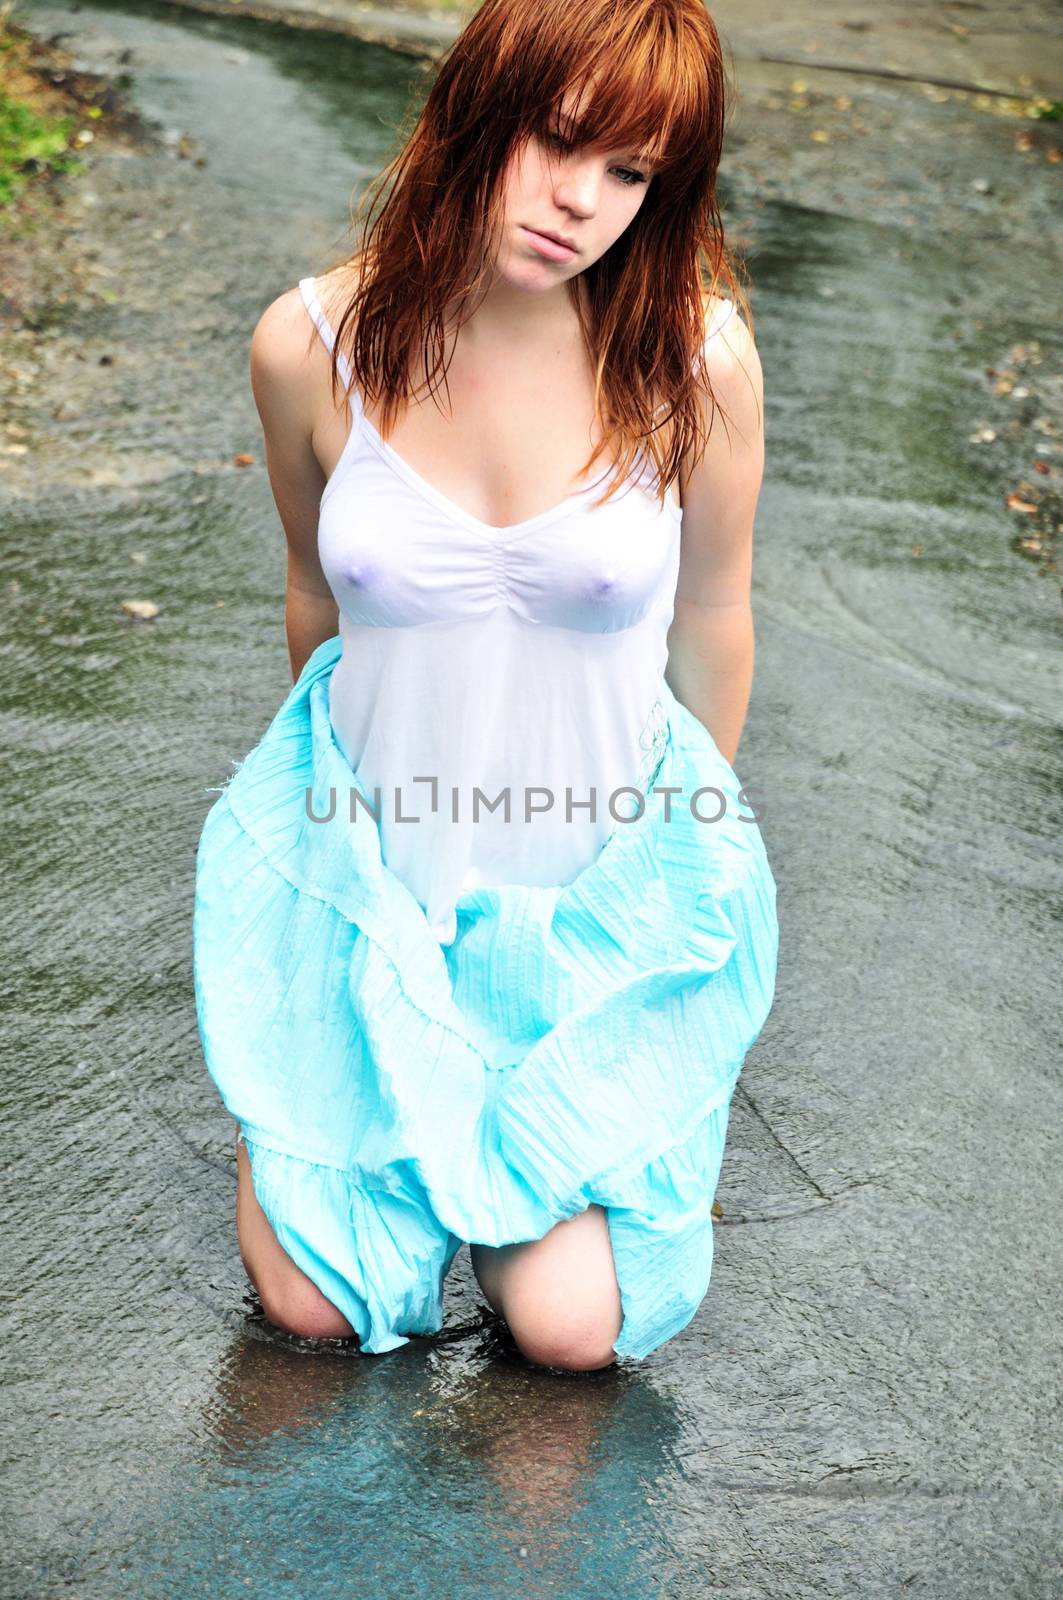 redheaded wet girl sitting in the puddle